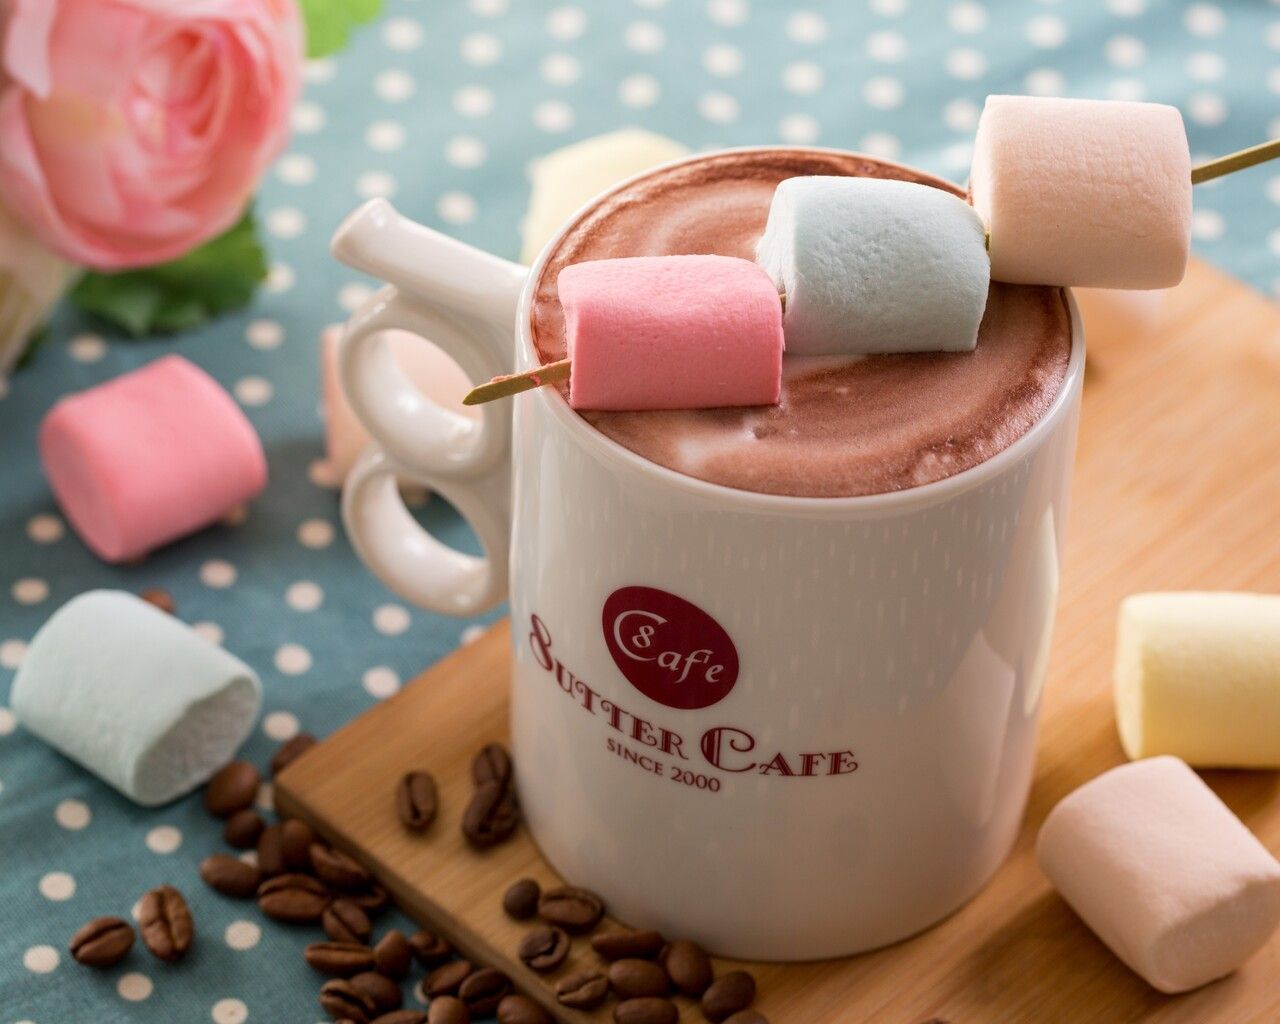 Hot chocolate and colorful marshmallows